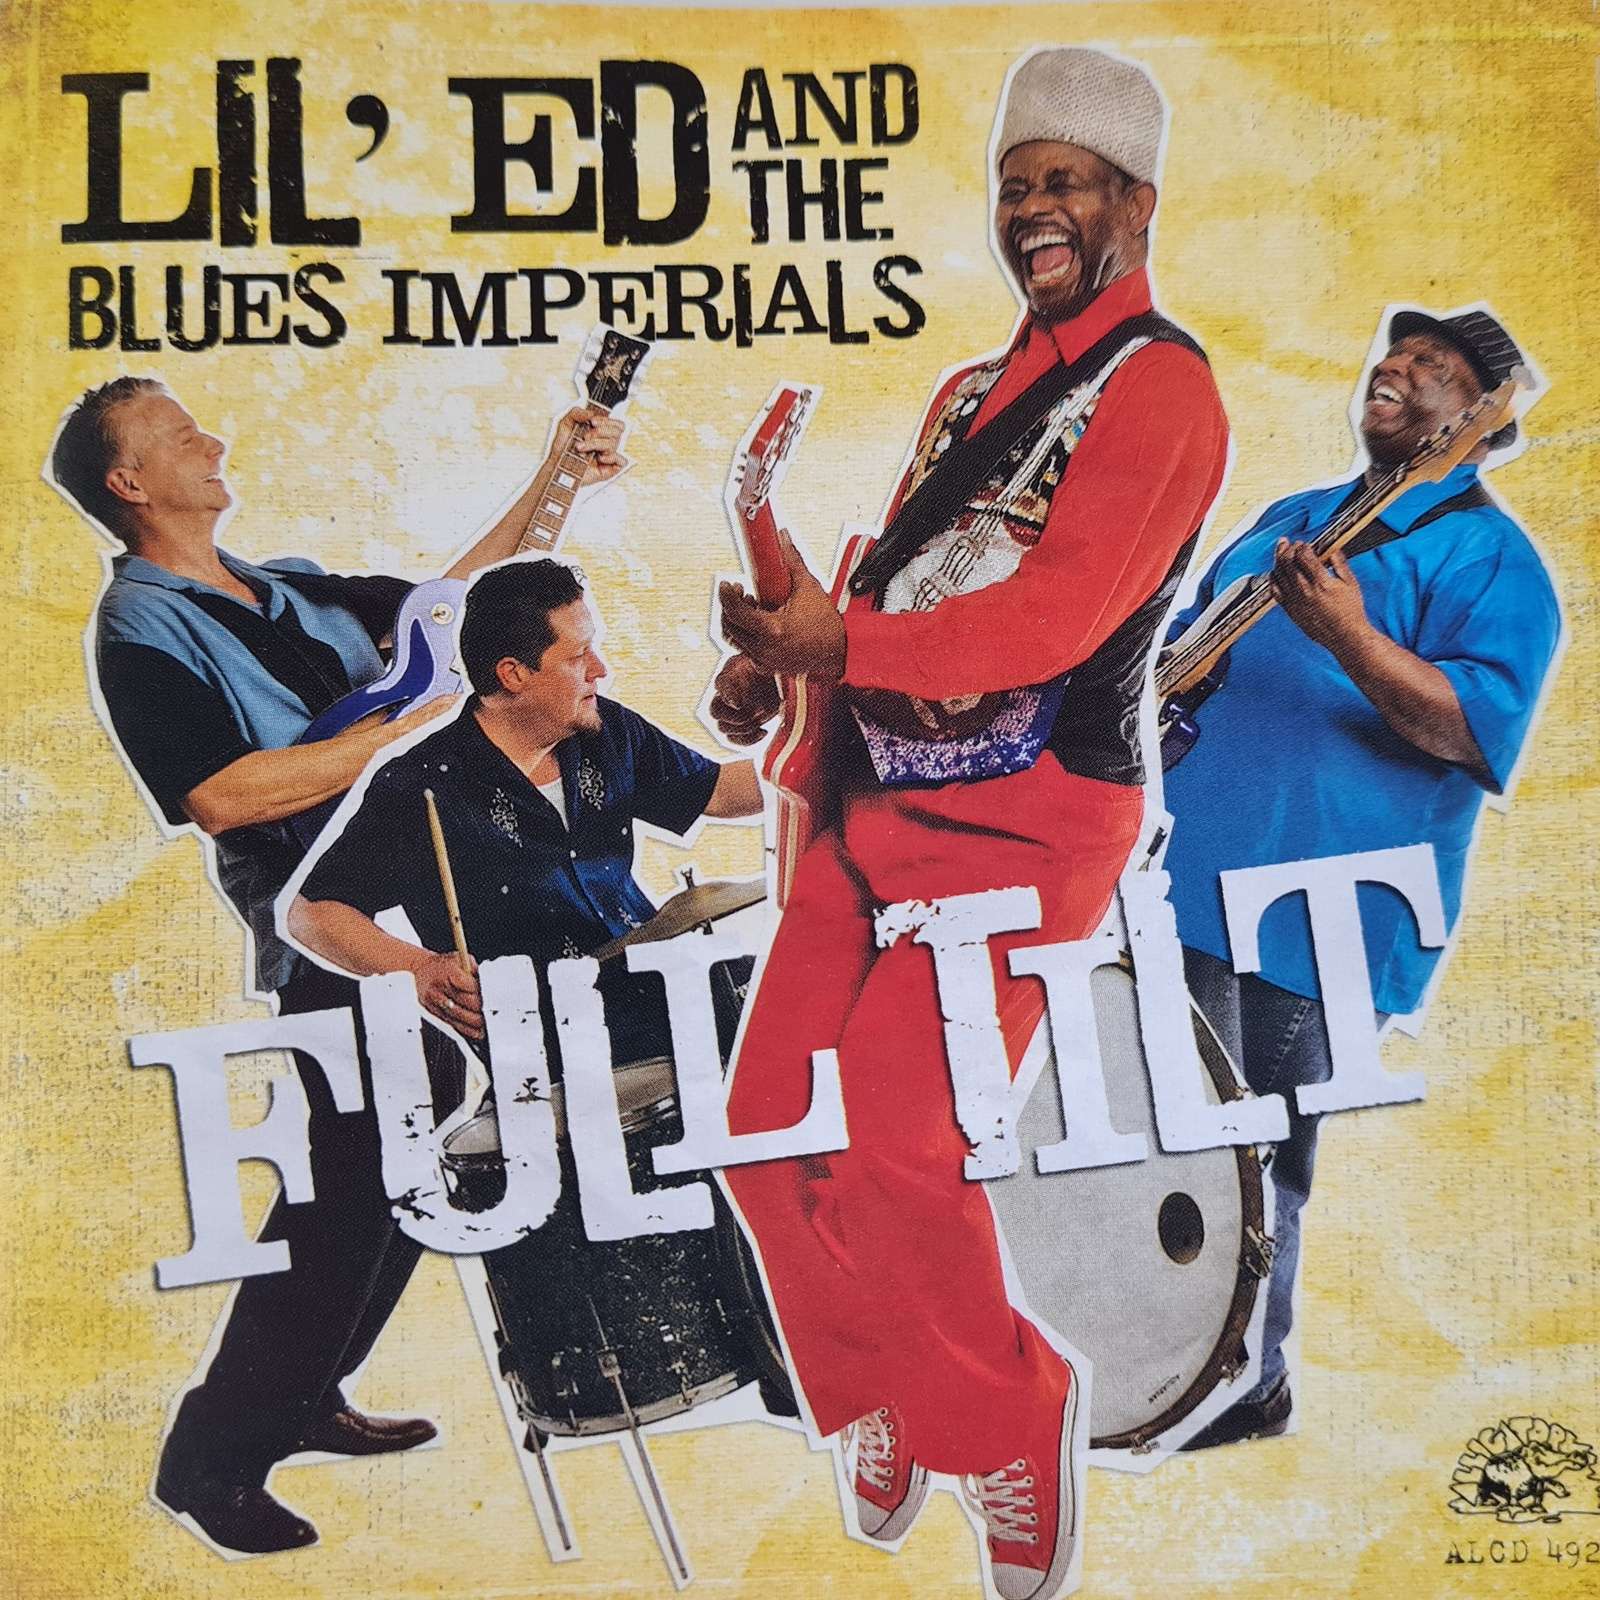 Lil' Ed and the Blues Imperials - Full Tilt (CD)